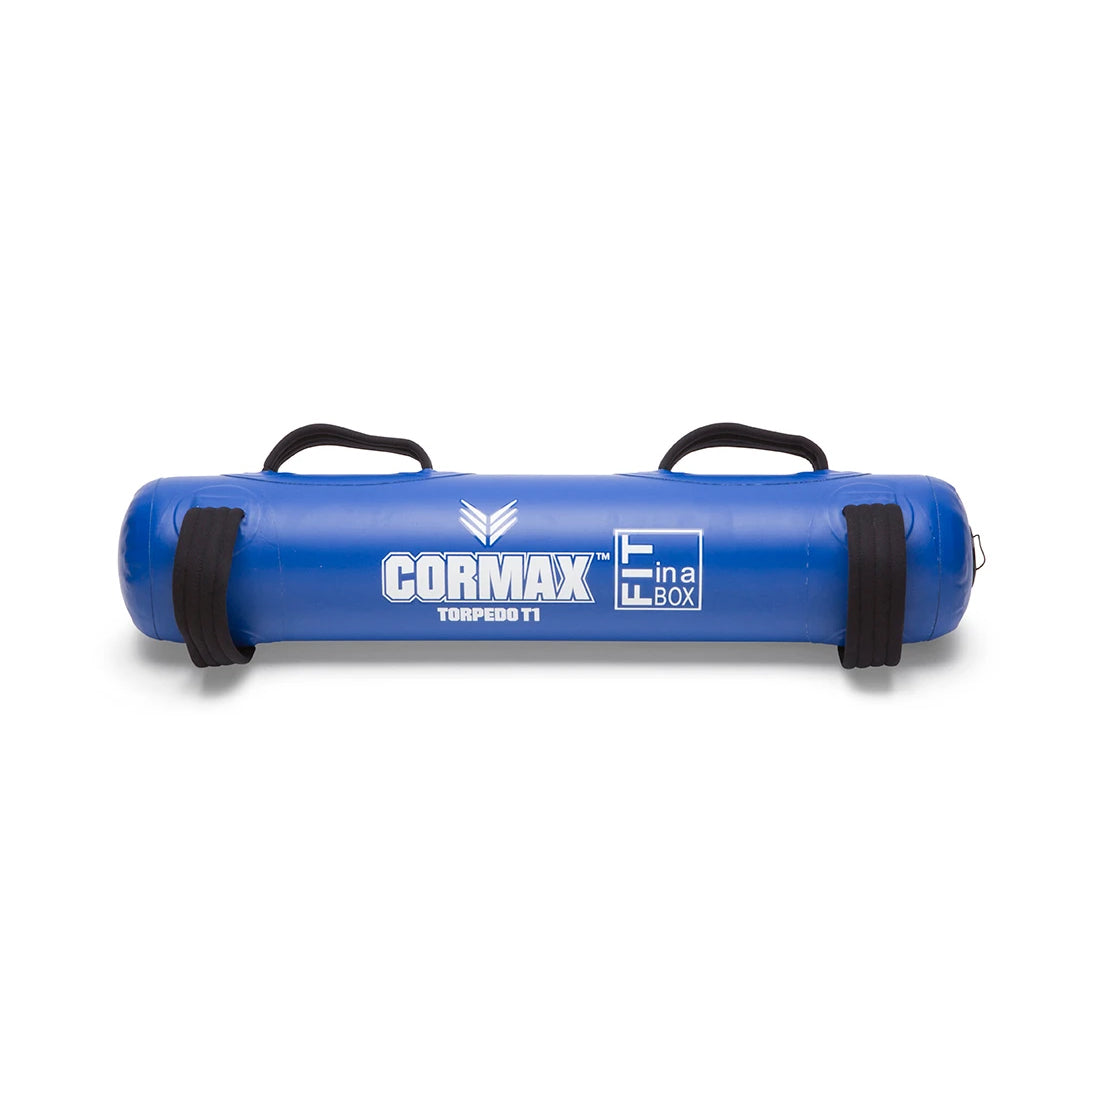 CorMax Torpedo T1- Buy now online with Free delivery in 1-2 days in UAE, Dubai, Abu-Dhabi. 